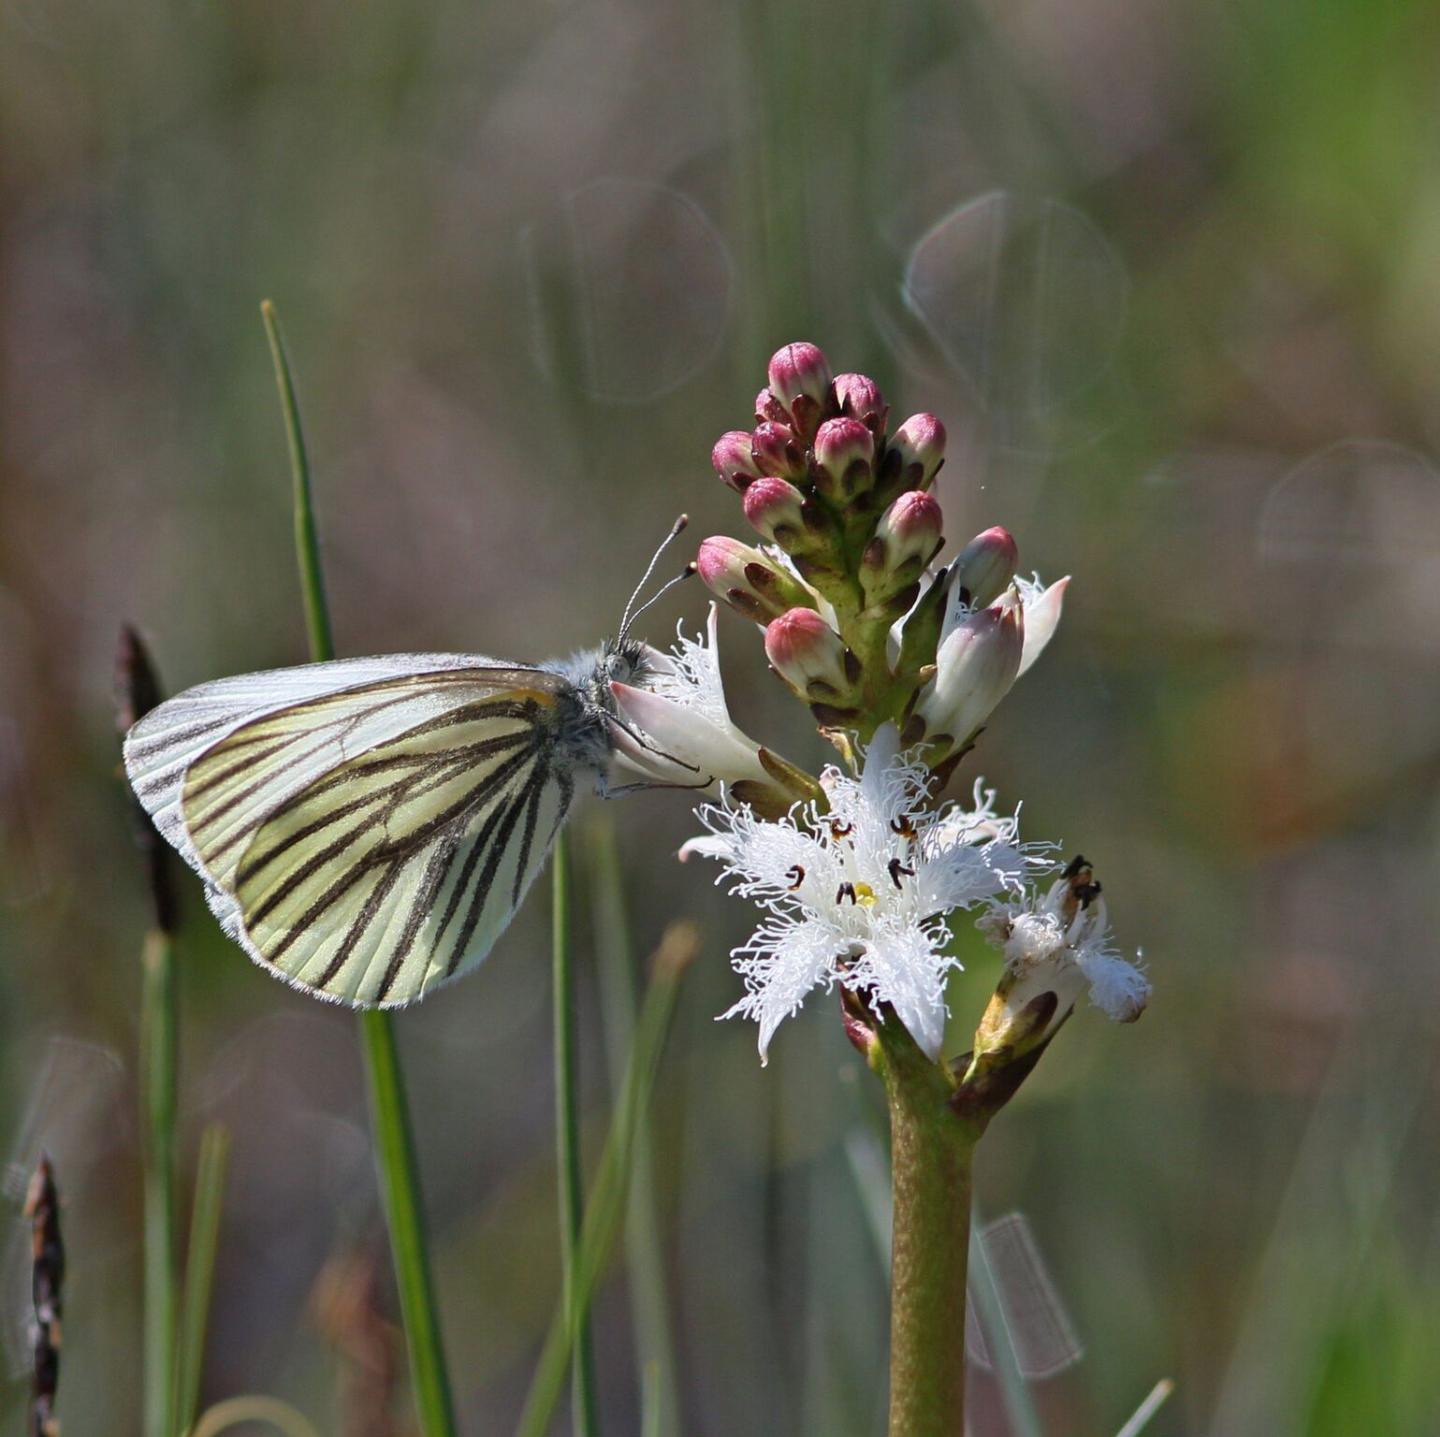 The Mustard White Butterfly